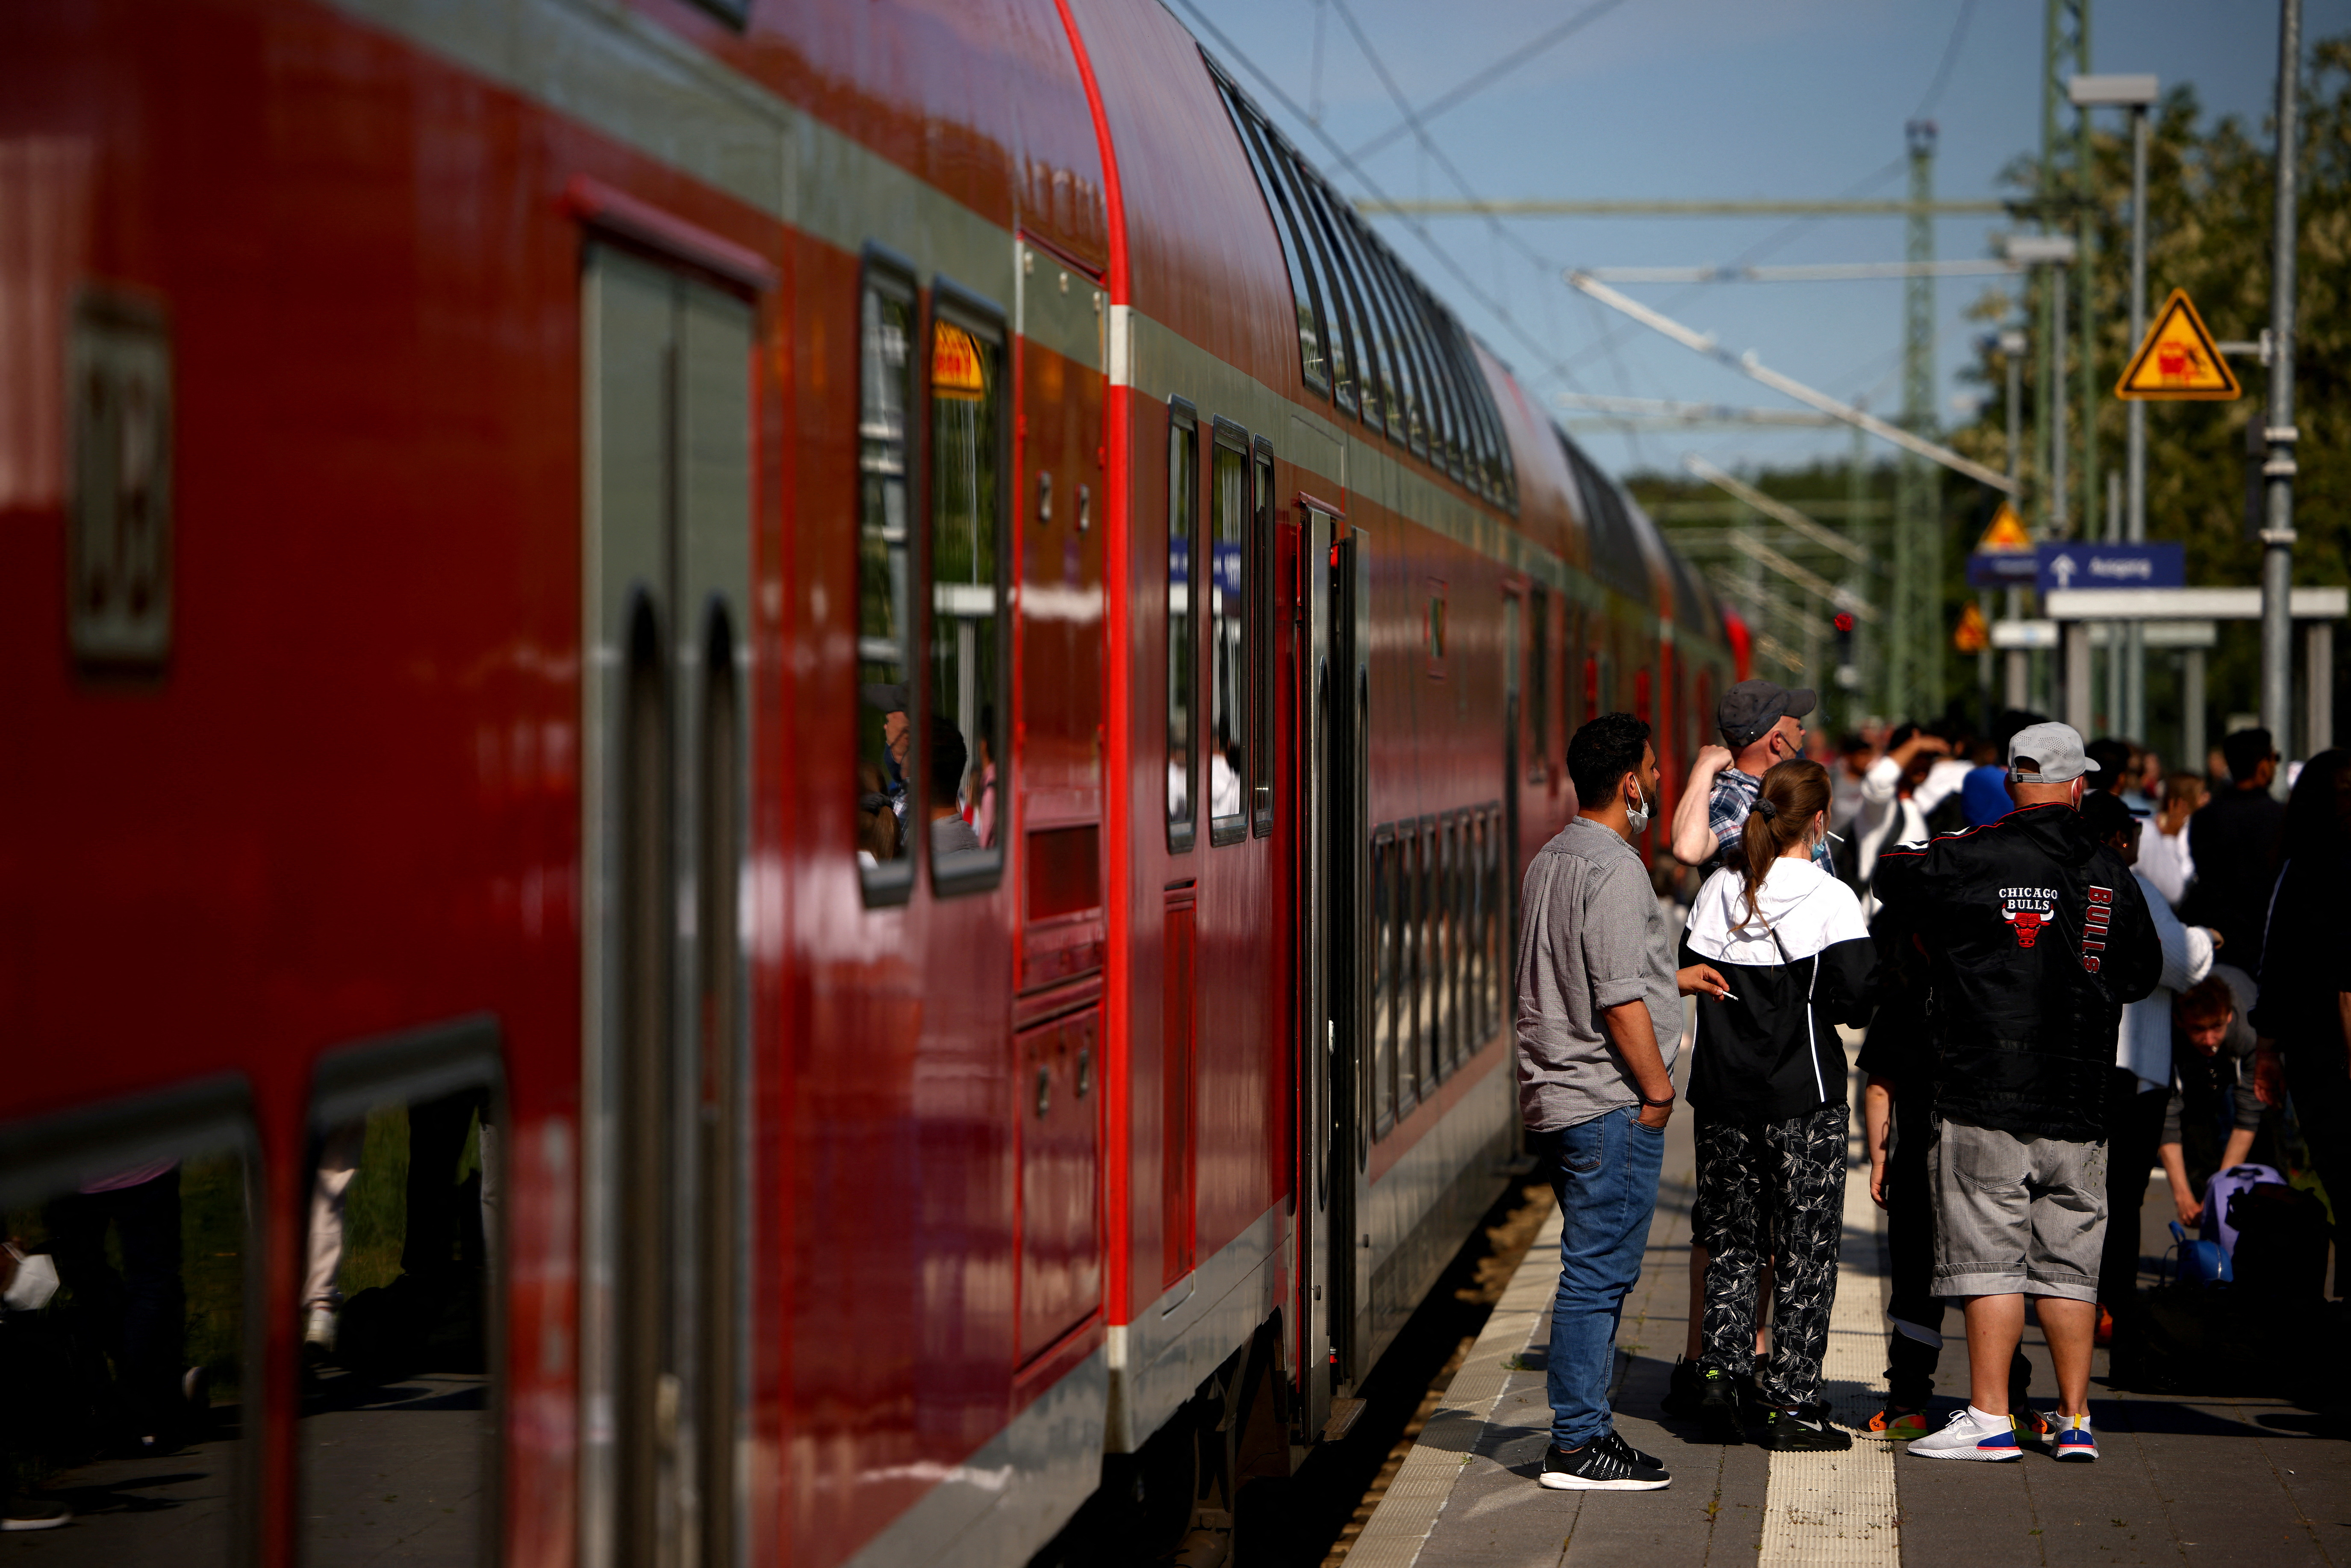 Public transport operators offer a nationwide special nine-euro ticket